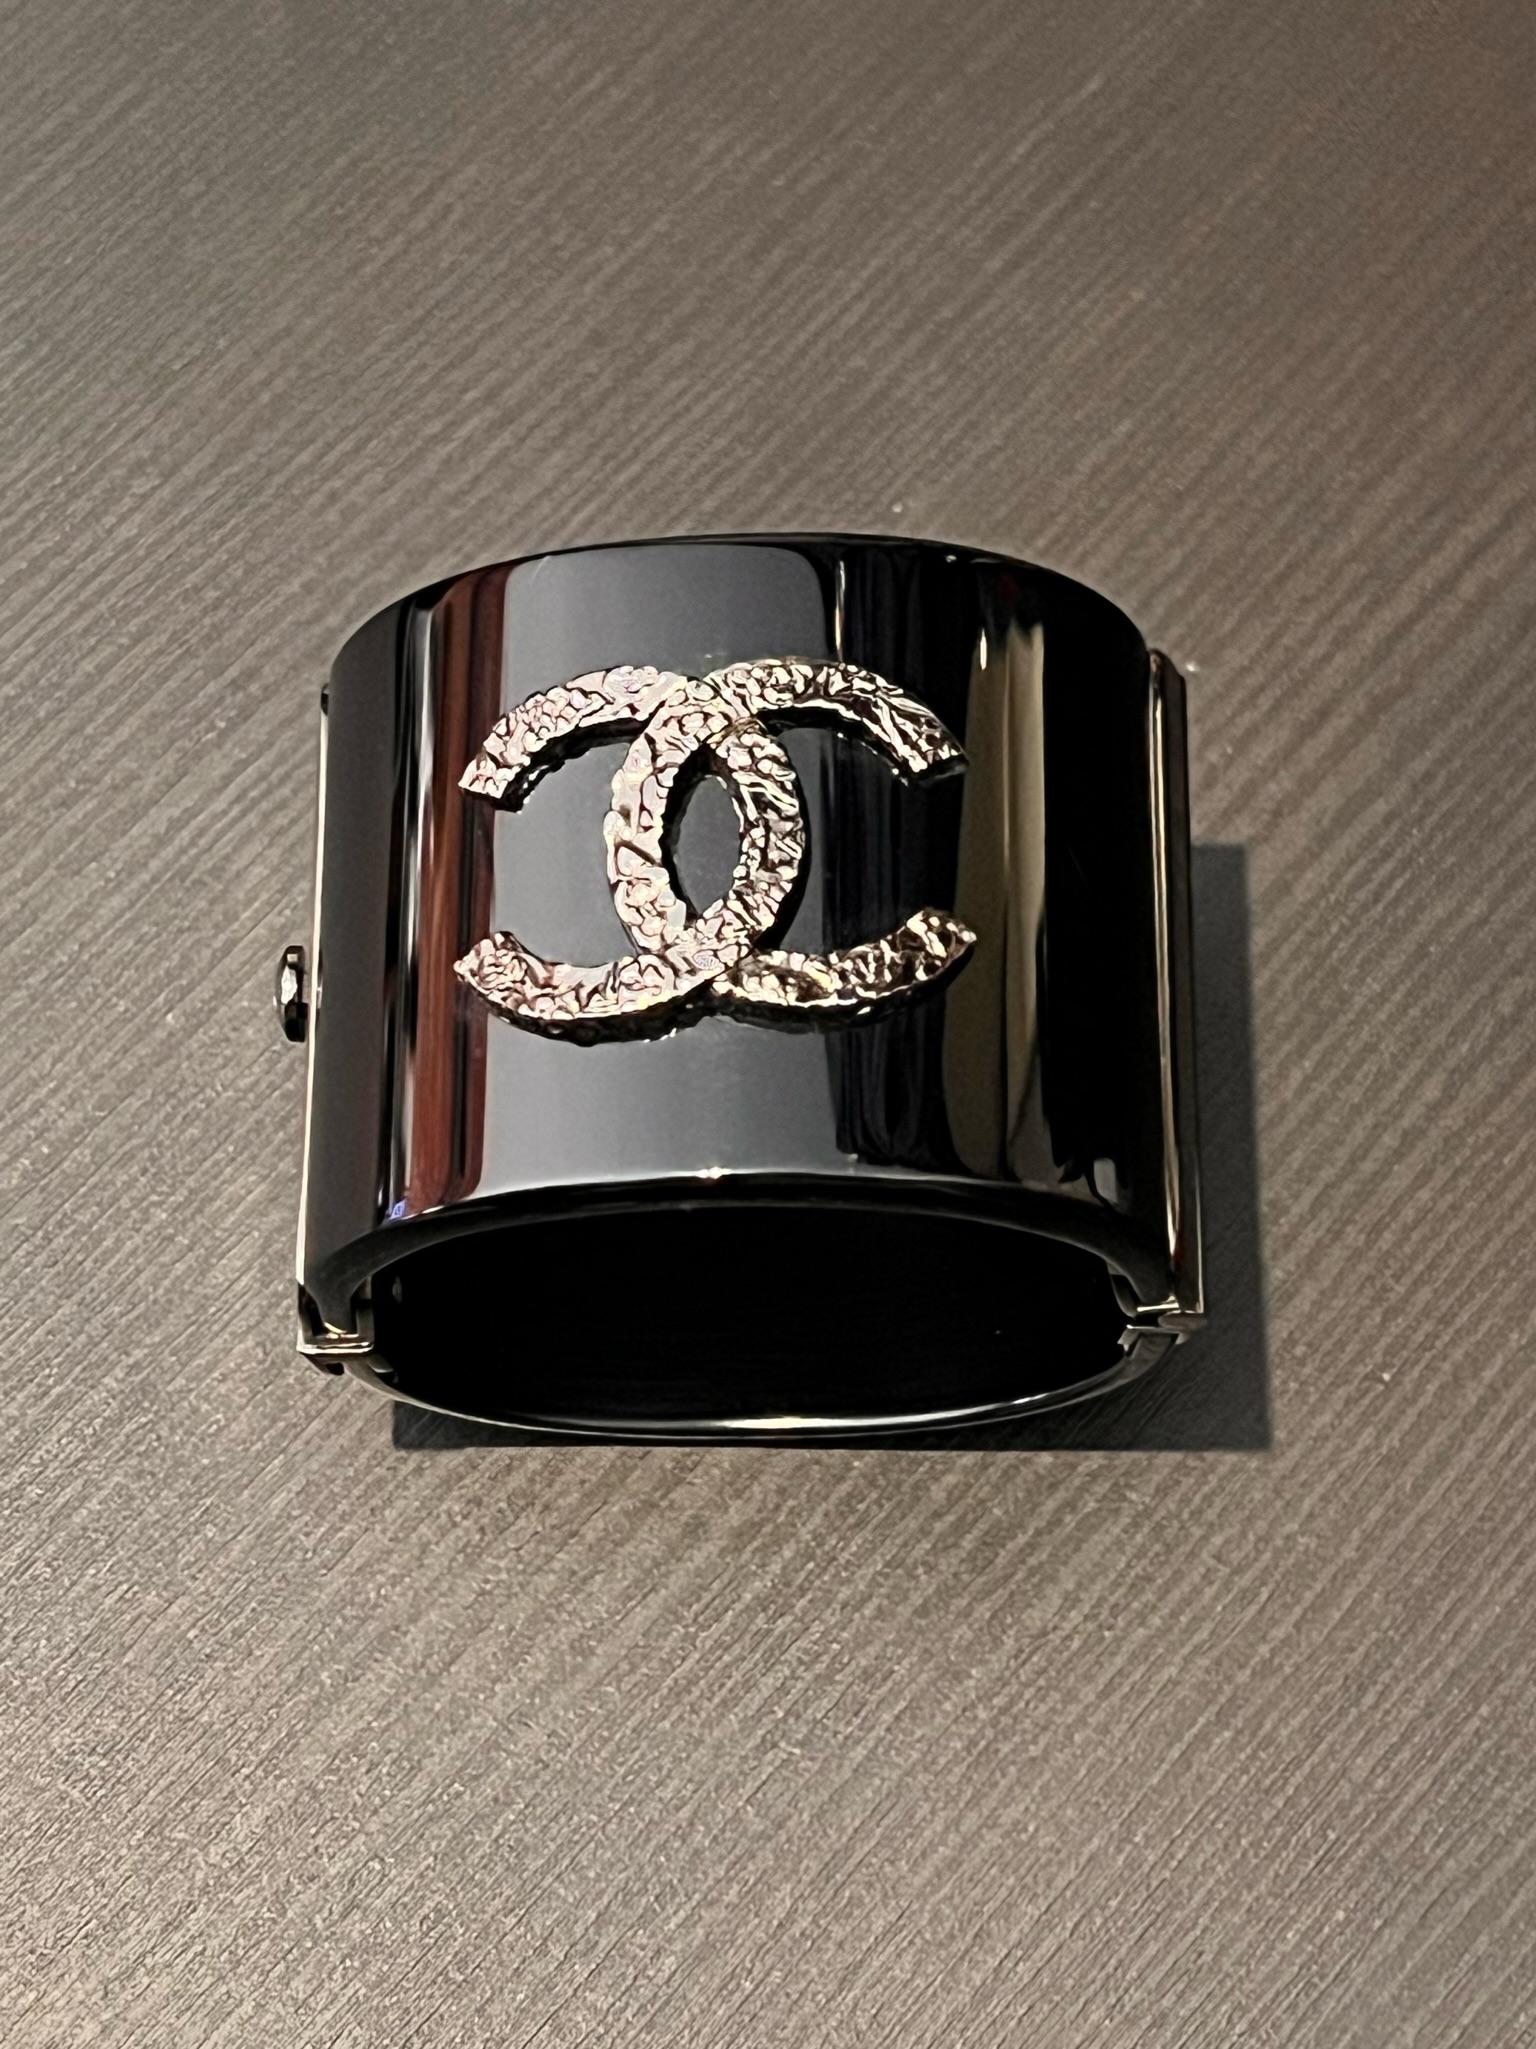 This is an authentic CHANEL Resin CC Cuff Bracelet in Black and silver. This bold and elaborate cuff is crafted of black resin. The cuff is accented with a classic CC logo in textured silver and opens with a matching silver button clasp. This is a